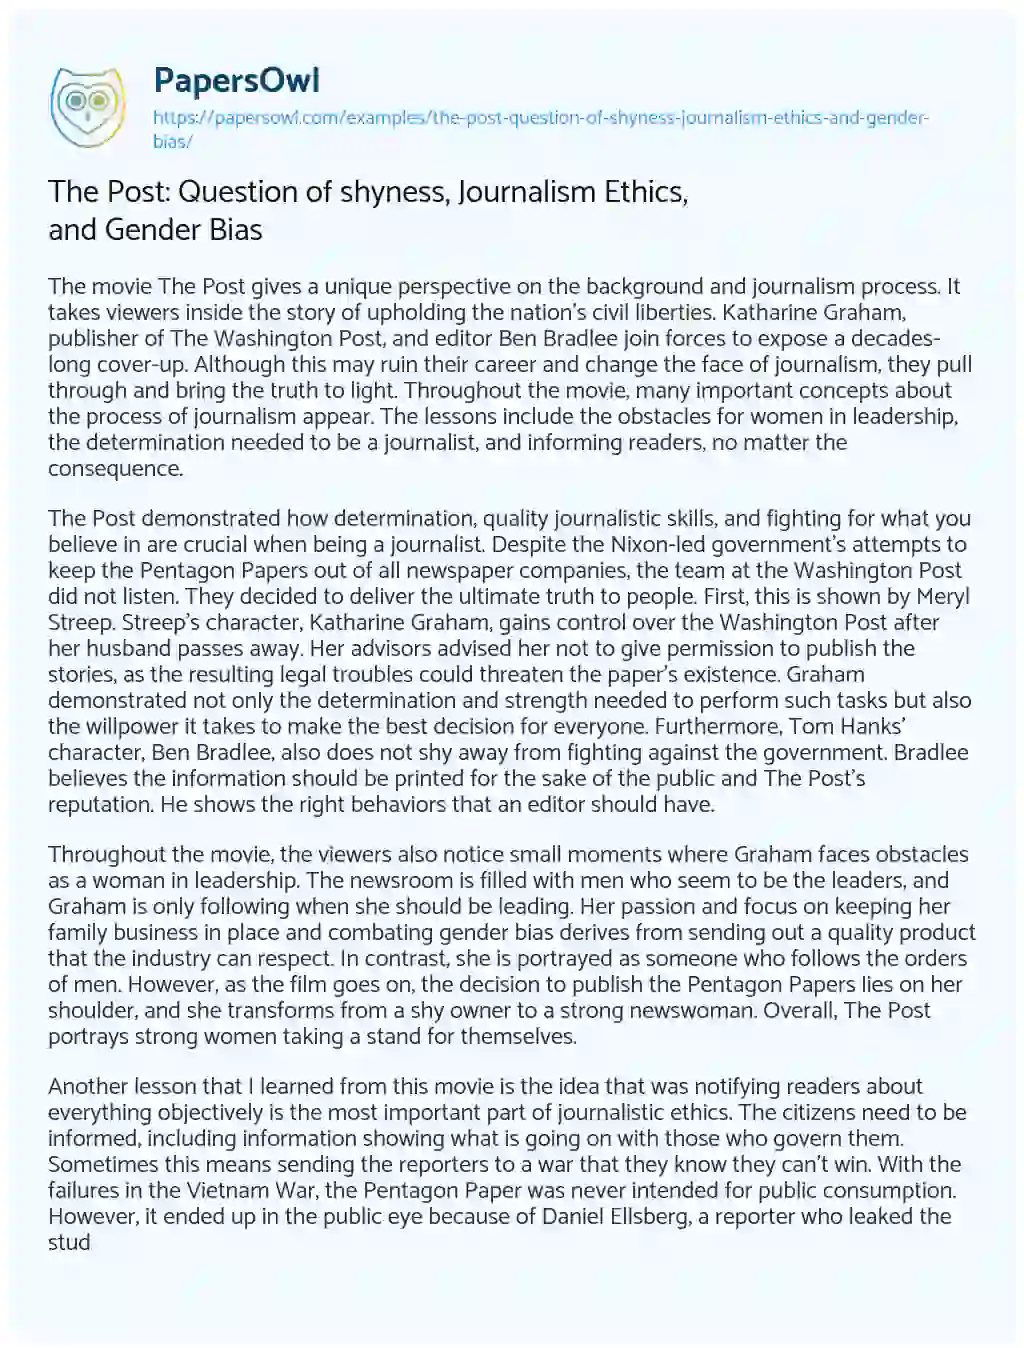 Essay on The Post: Question of Shyness, Journalism Ethics, and Gender Bias